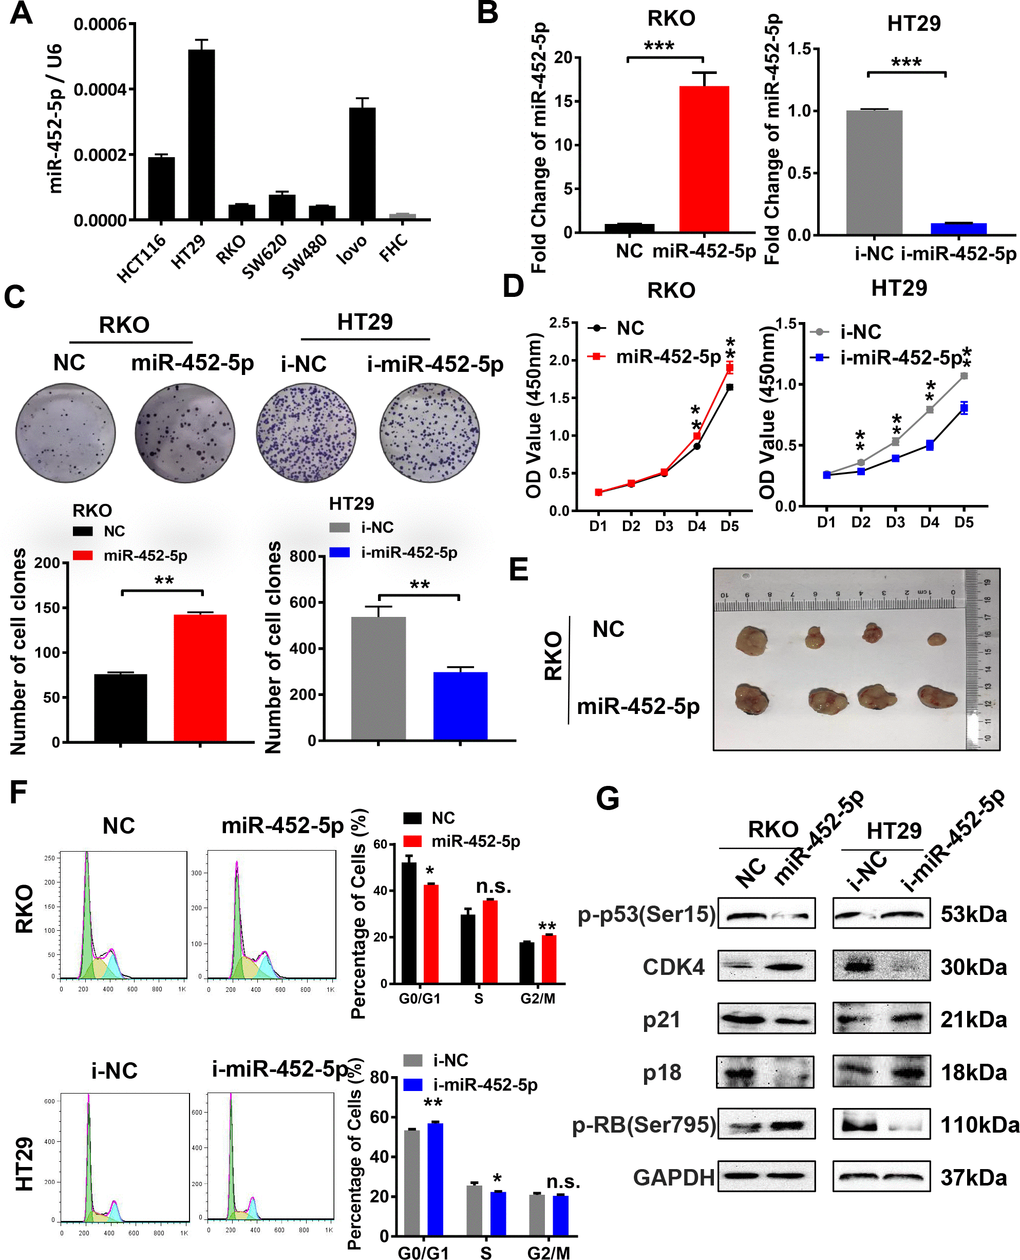 MiR-452-5p promotes malignant biological behaviors of CRC cells. (A) The expression levels of miR-452-5p in colorectal cancer cell lines and human normal intestinal epithelial cell line FHC. (B) Instantaneous transfection efficiency verification of miR-452-5p. (C) Effects of overexpression and knockdown of miR-452-5p on the proliferation of CRC cells: CCK8 assay. (D) Effects of overexpression and knockdown of miR-452-5p on the proliferation of CRC cells: panel cloning assay. (E) Effects of overexpression of miR-452-5p on subcutaneous tumor formation in nude mice. (F) Effects of overexpression and knockdown of miR-452-5p on CRC cell cycle: cell cycle detection by flow cytometry. (G) Cell cycle related-proteins detected by western blotting.*p 